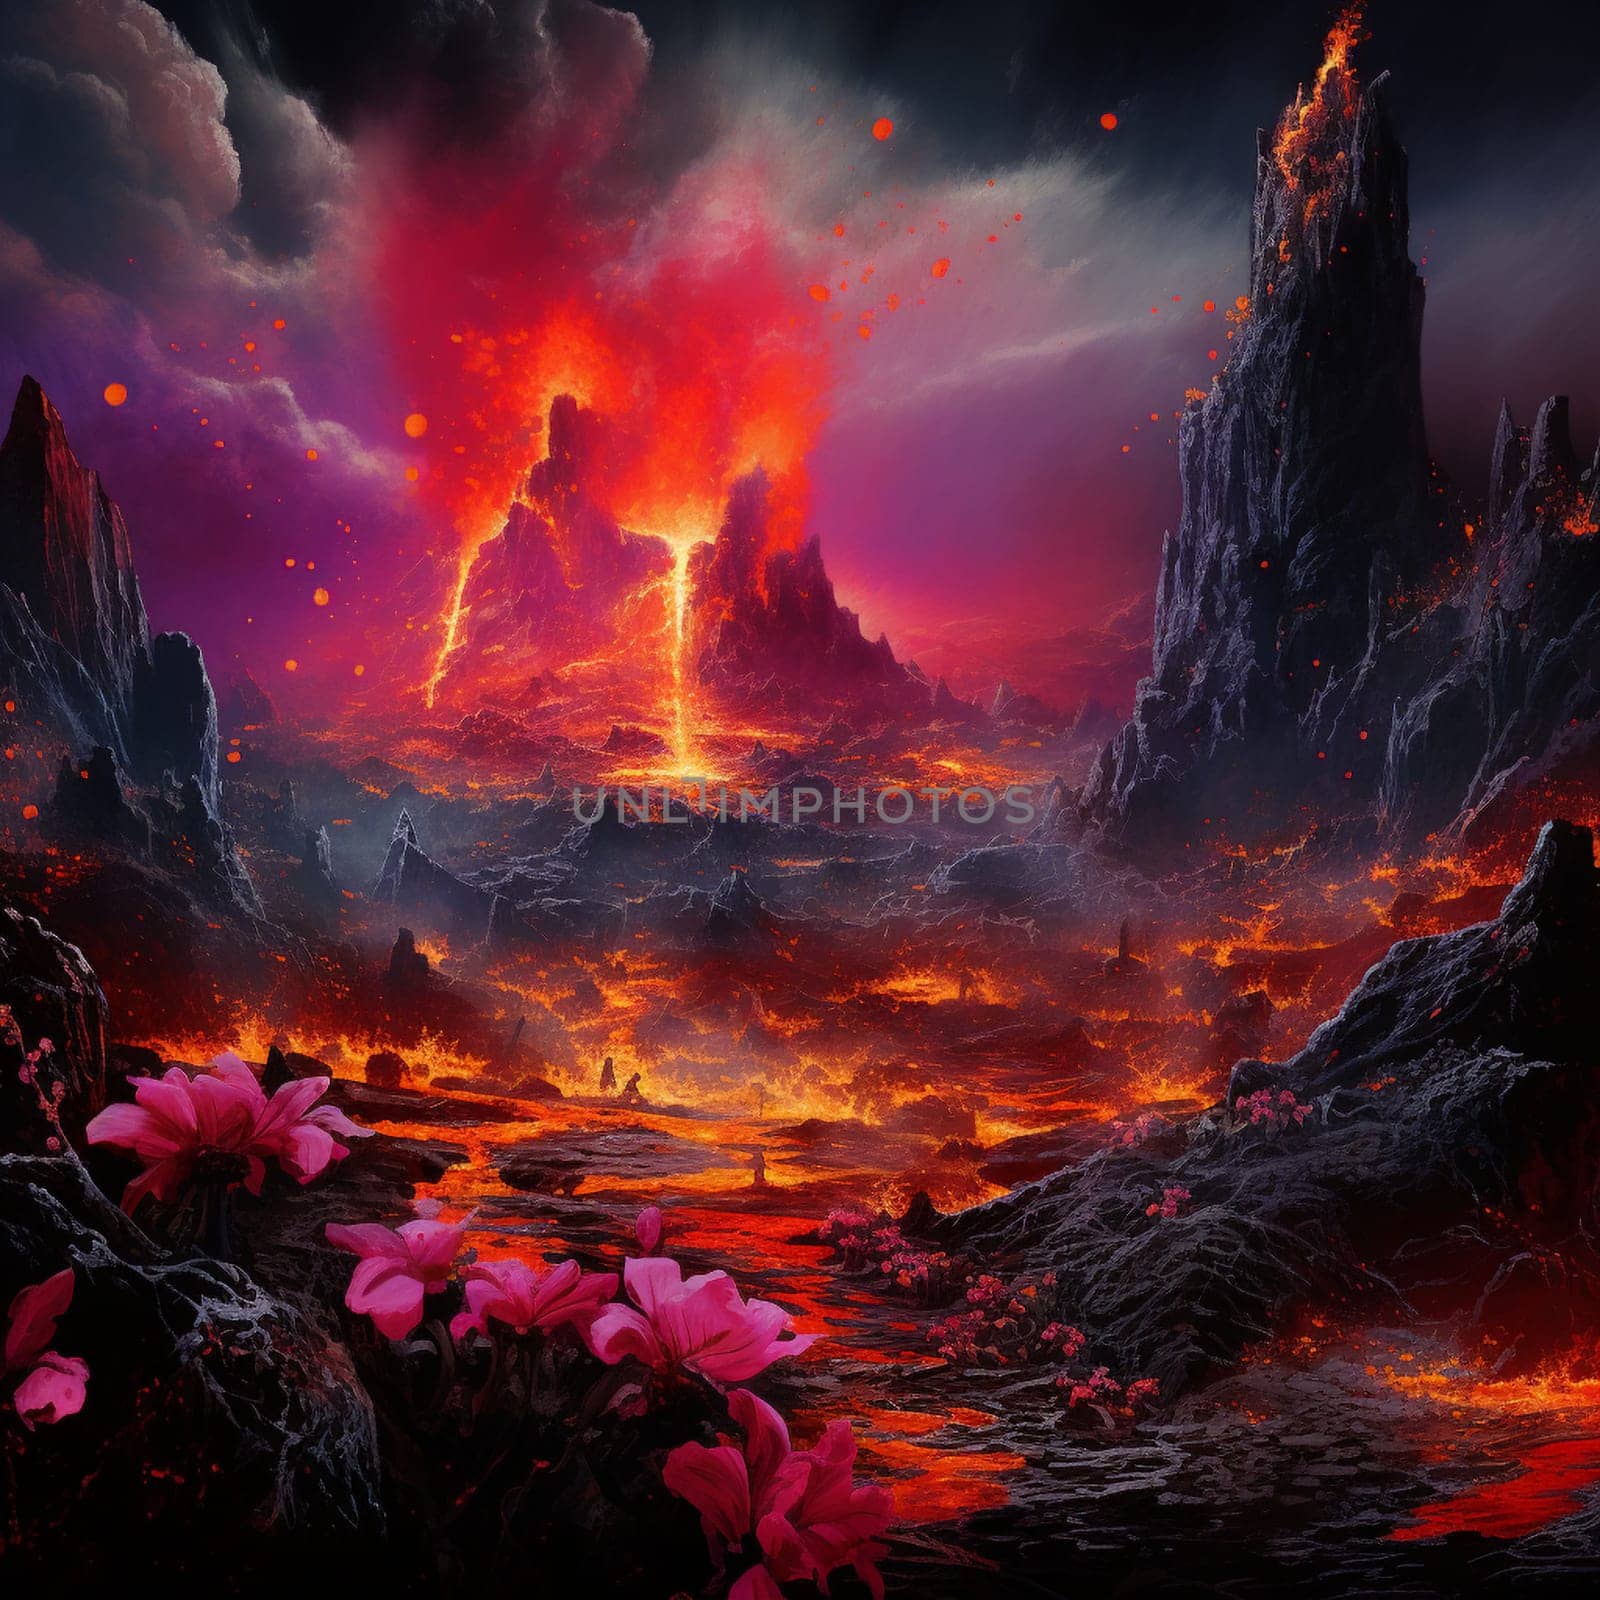 Experience the surreal and vibrant landscape of Molten Awakening, where fiery lava erupts from unexpected sources, intertwining with elements of nature. In this captivating scene, vibrant flowers made of molten lava bloom amidst a dense forest, casting an otherworldly glow that fascinates the senses. The artwork showcases a vivid and energetic art style, emphasizing the stark contrast between the destructive power of the volcano and the mesmerizing beauty it creates.